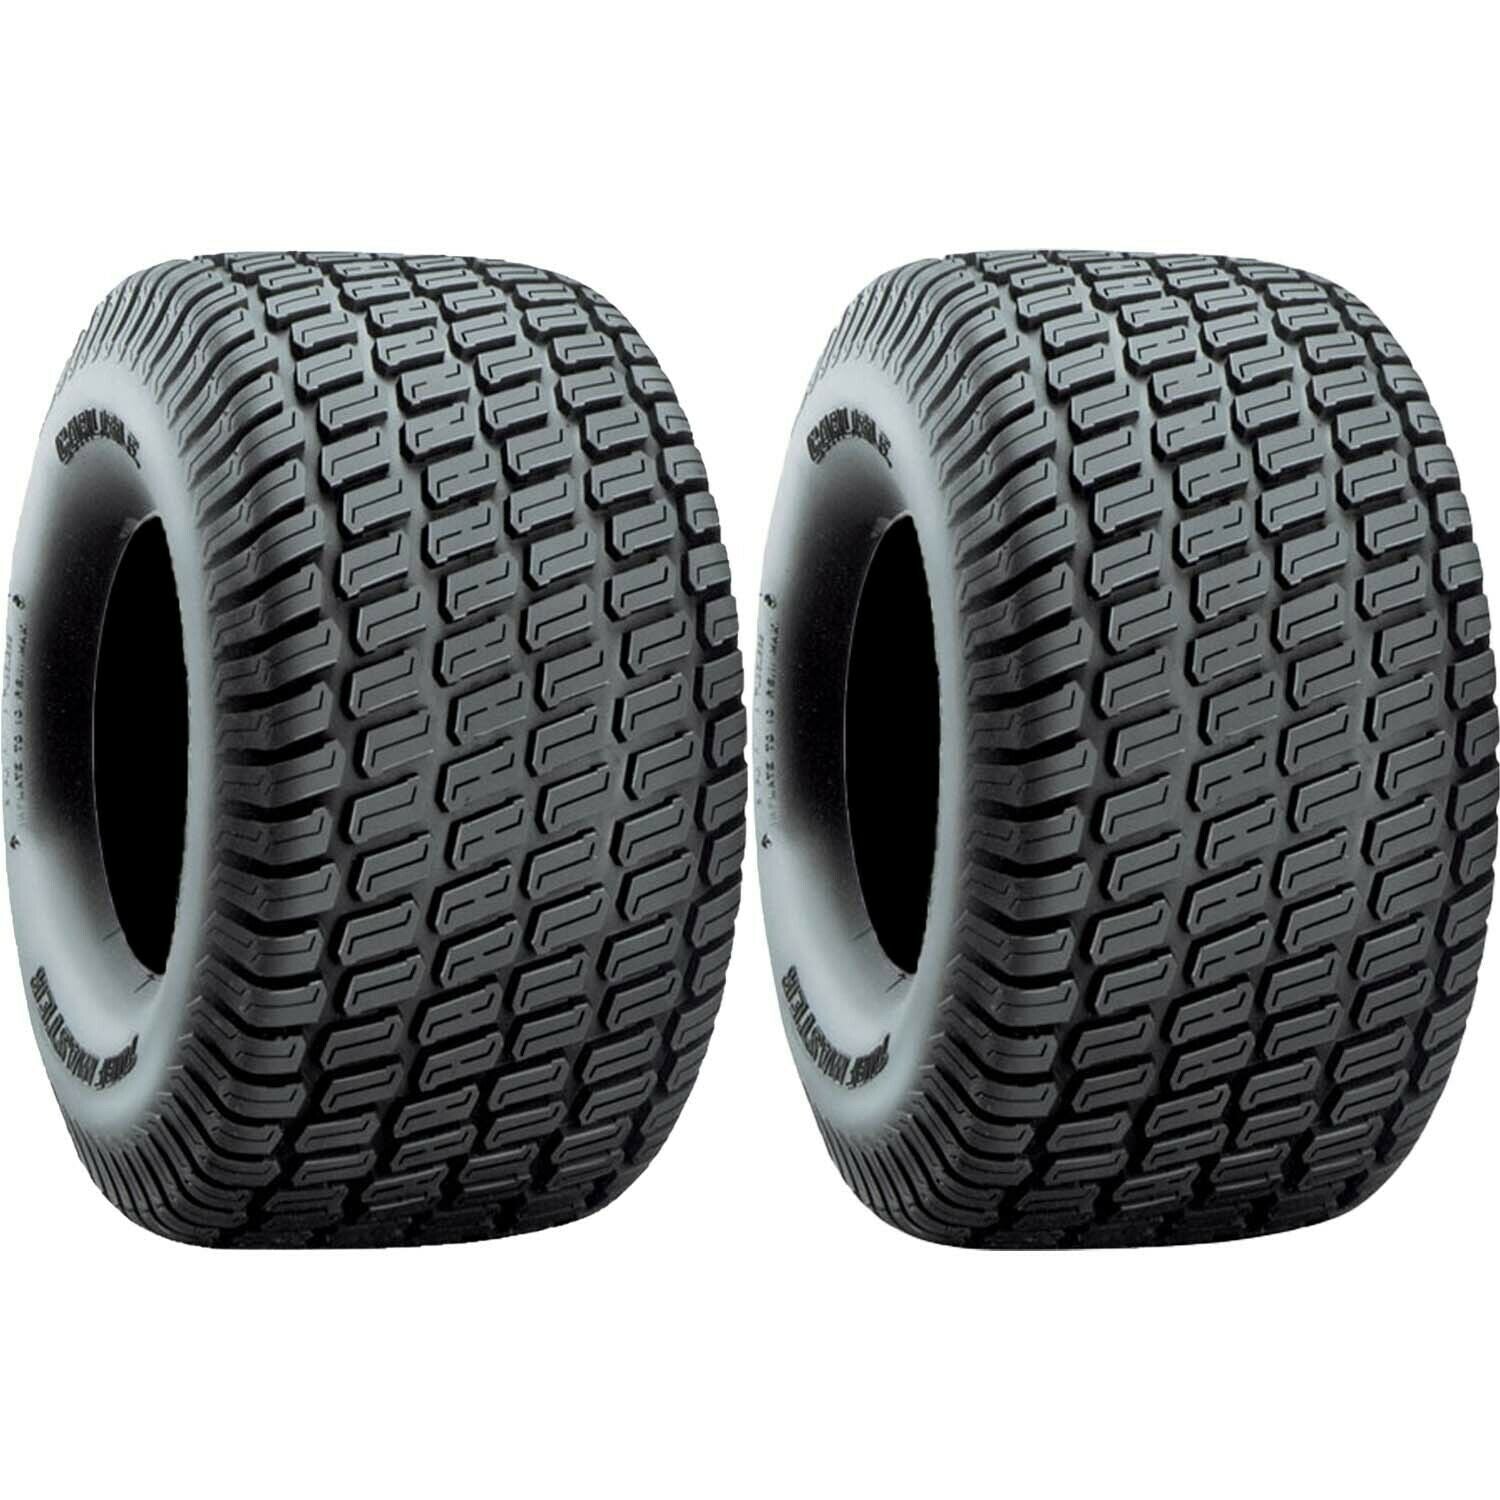 Carlisle Turf Master Lawn and Garden Tire 4Ply 20x8.00-10 - Pack of 2